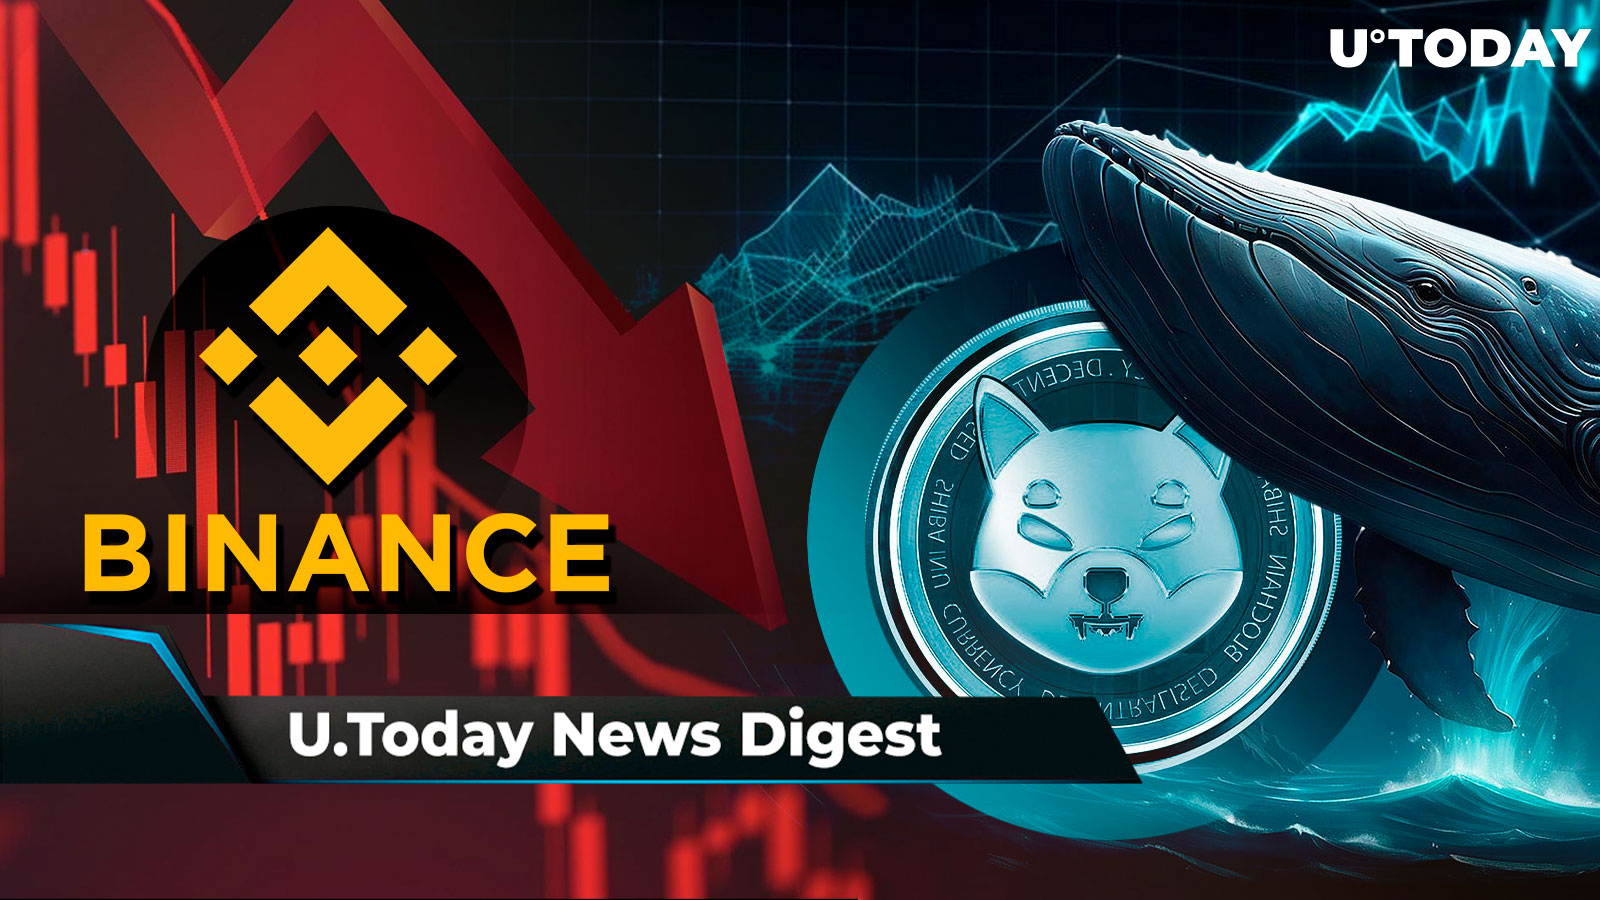 Binance Sees Enormous Volume Drop, Shiba Inu Surges 290% in Key Whale Metric, Bitcoin ETPs Go Live on London's Stock Exchange: Crypto News Digest by U.Today